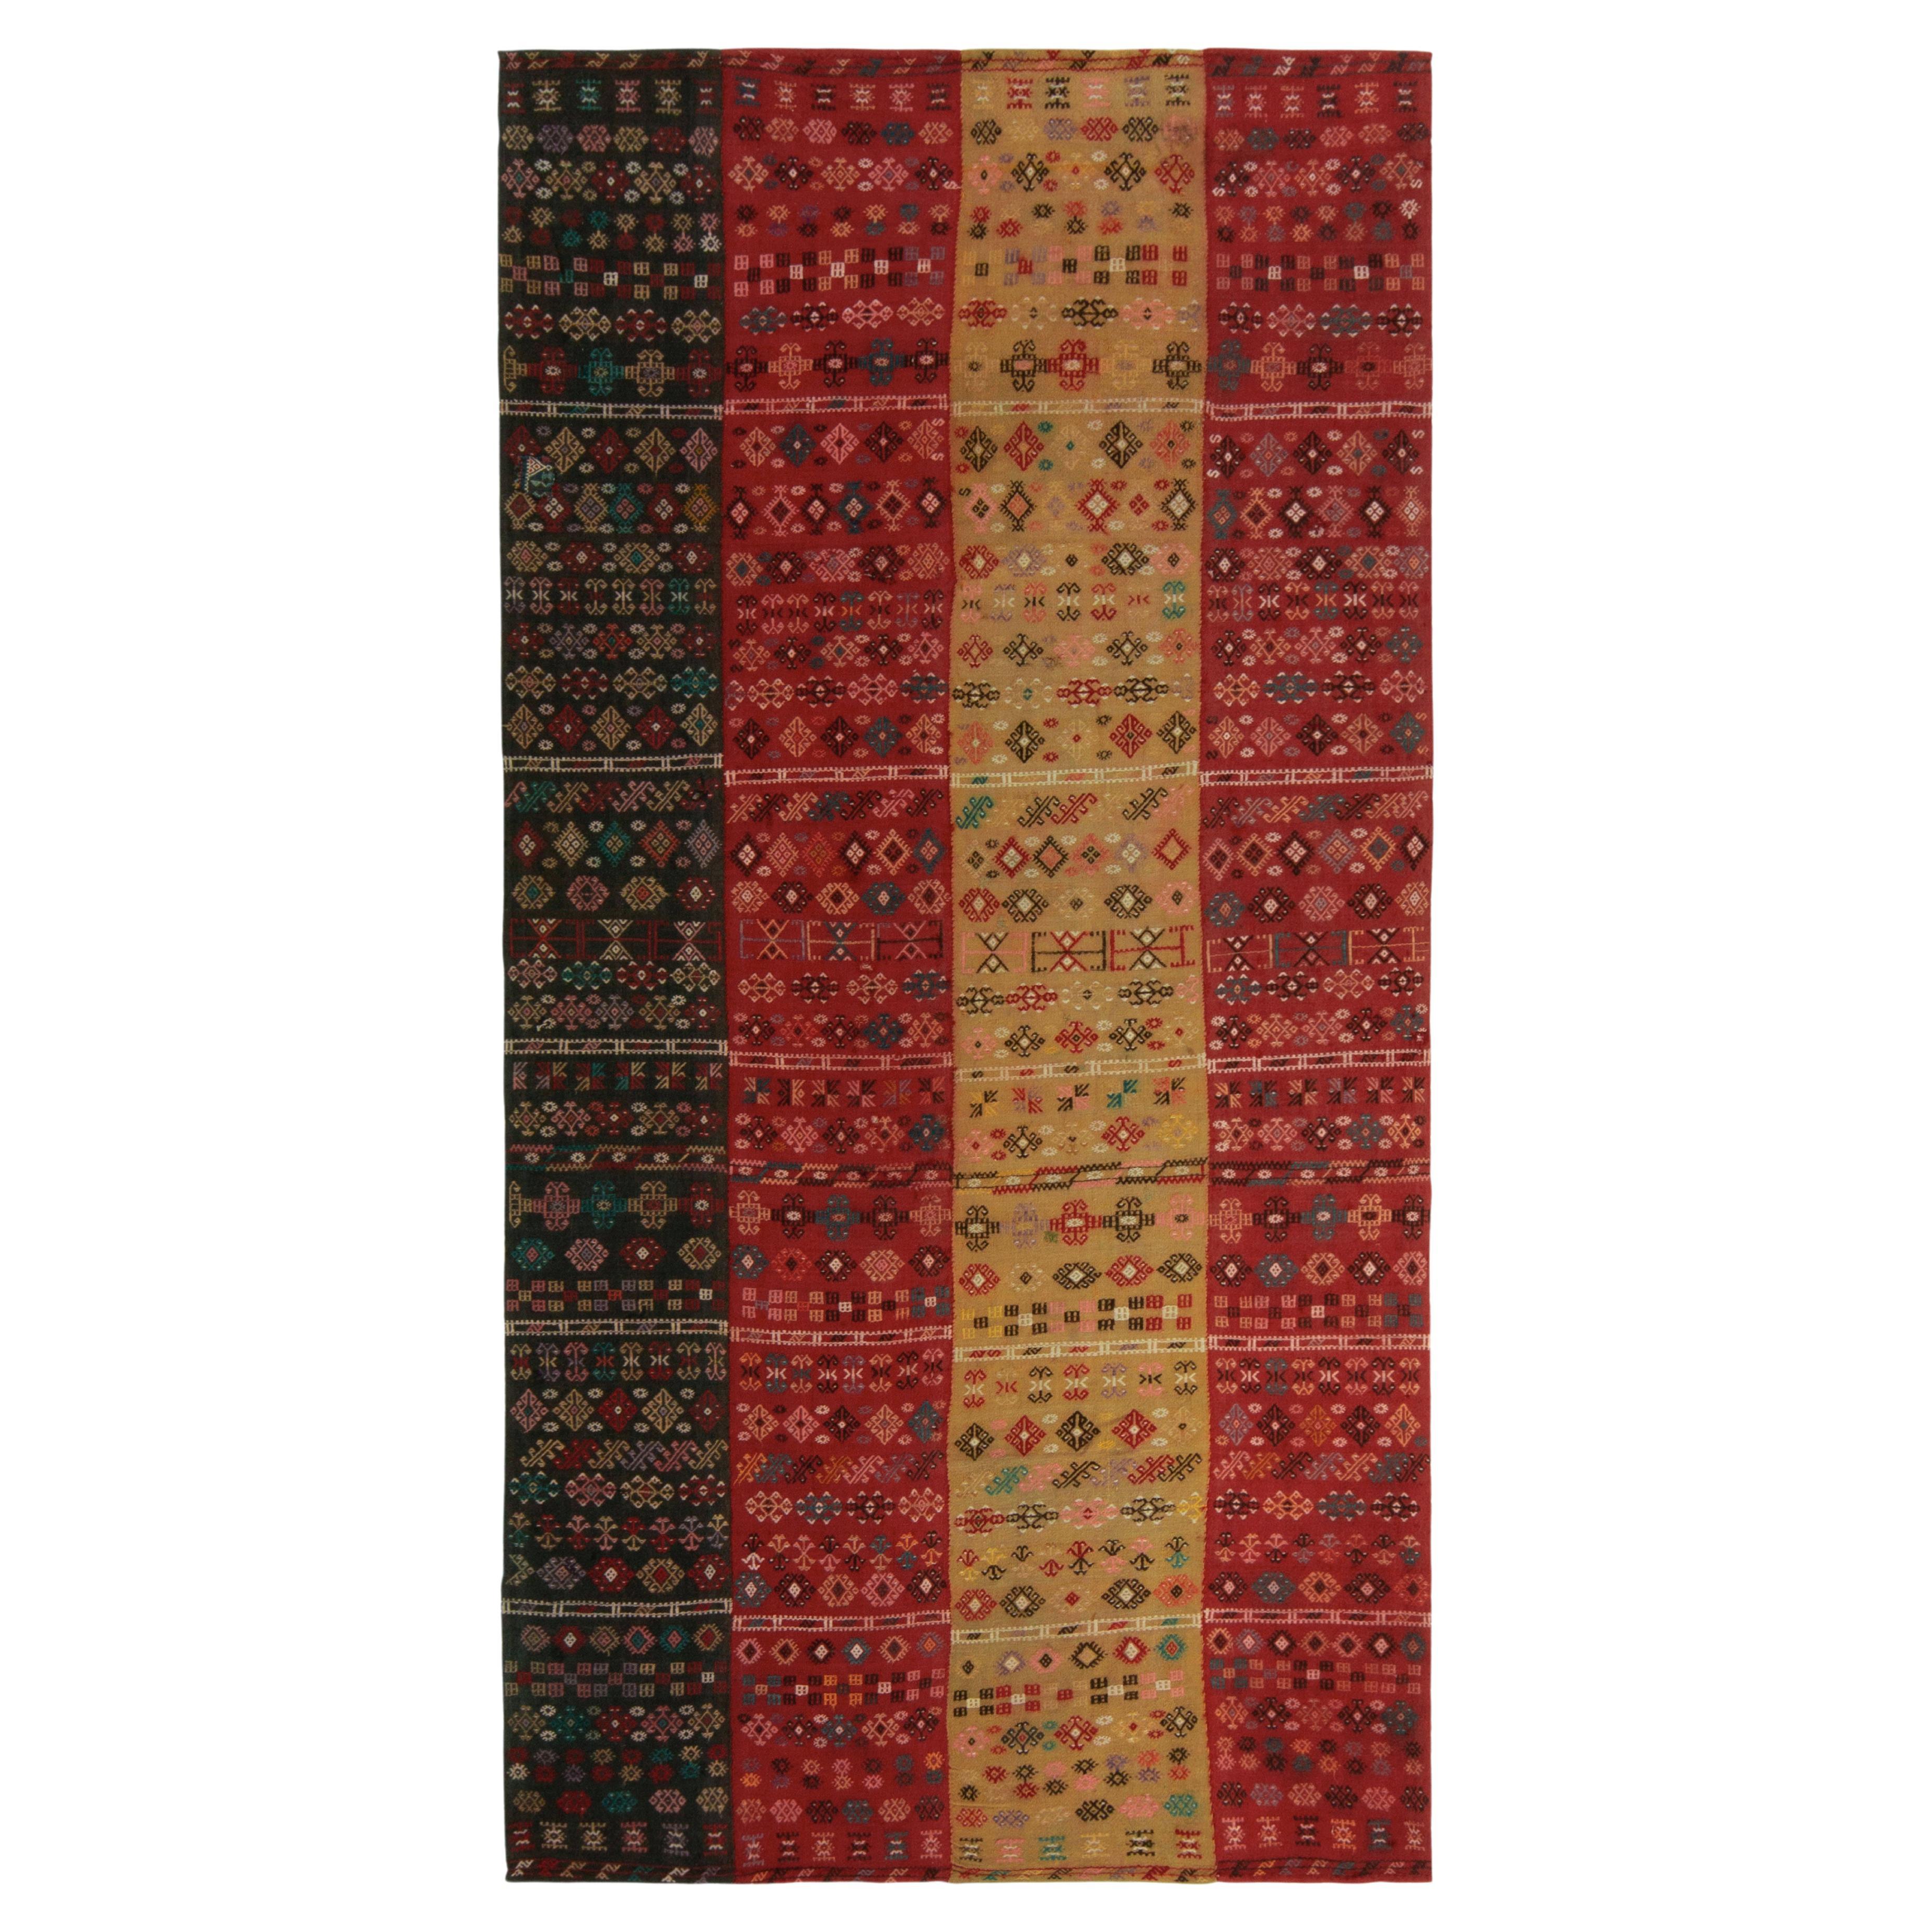 Antique Russian Verneh kilim in Red, Beige Geometric Patterns by Rug & Kilim For Sale